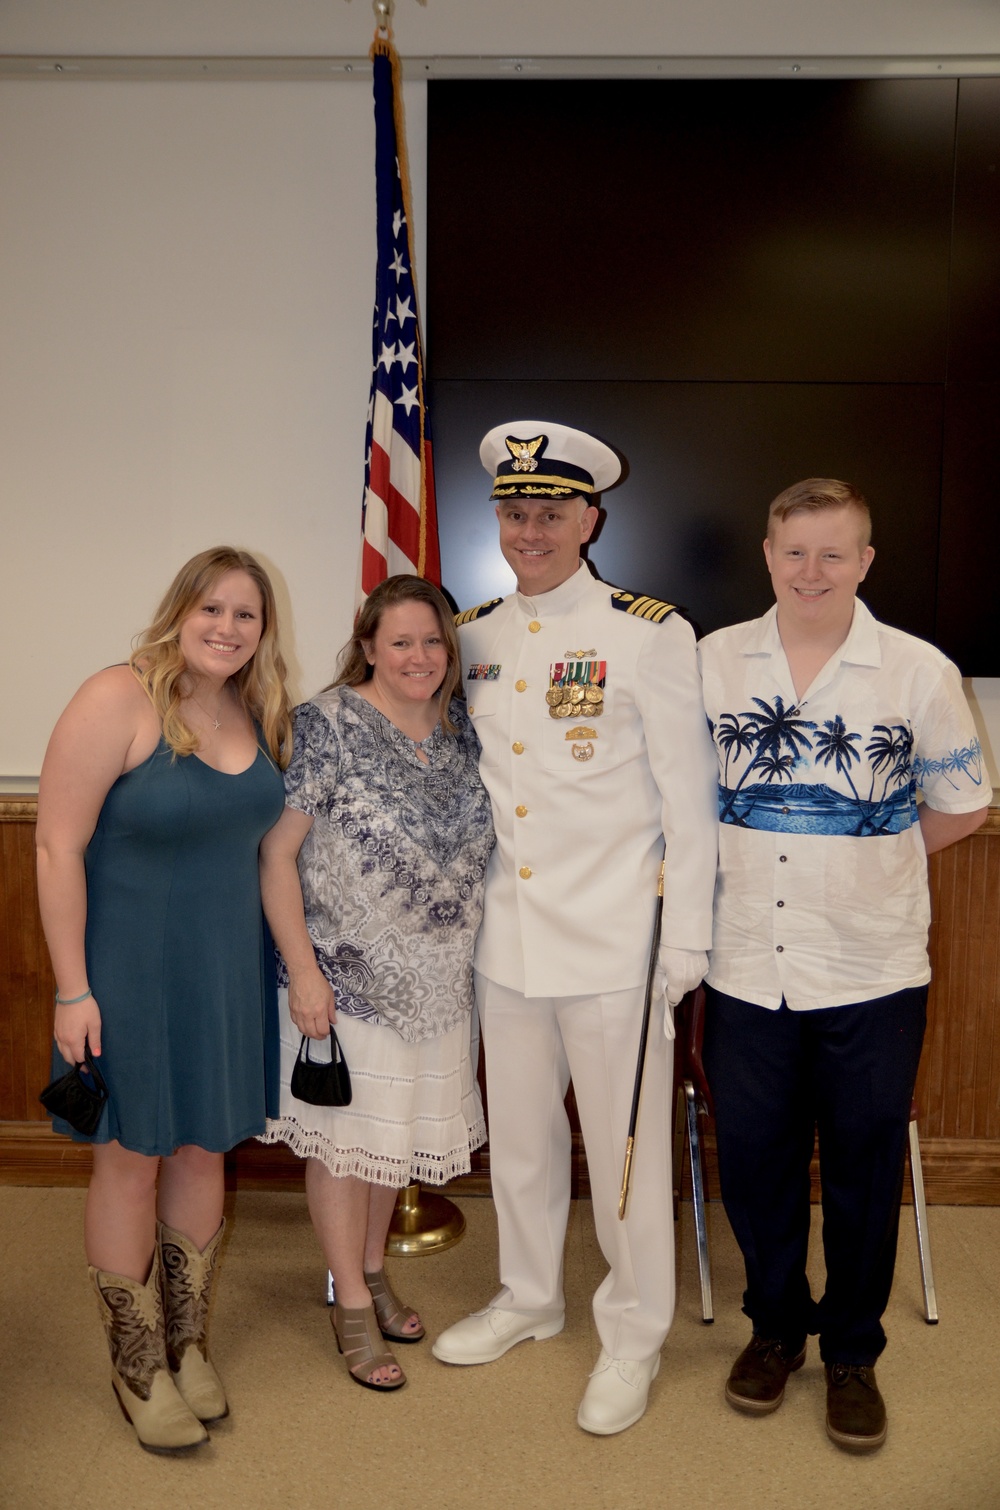 Coast Guard Sector Delaware Bay holds change of command ceremony in Philadelphia